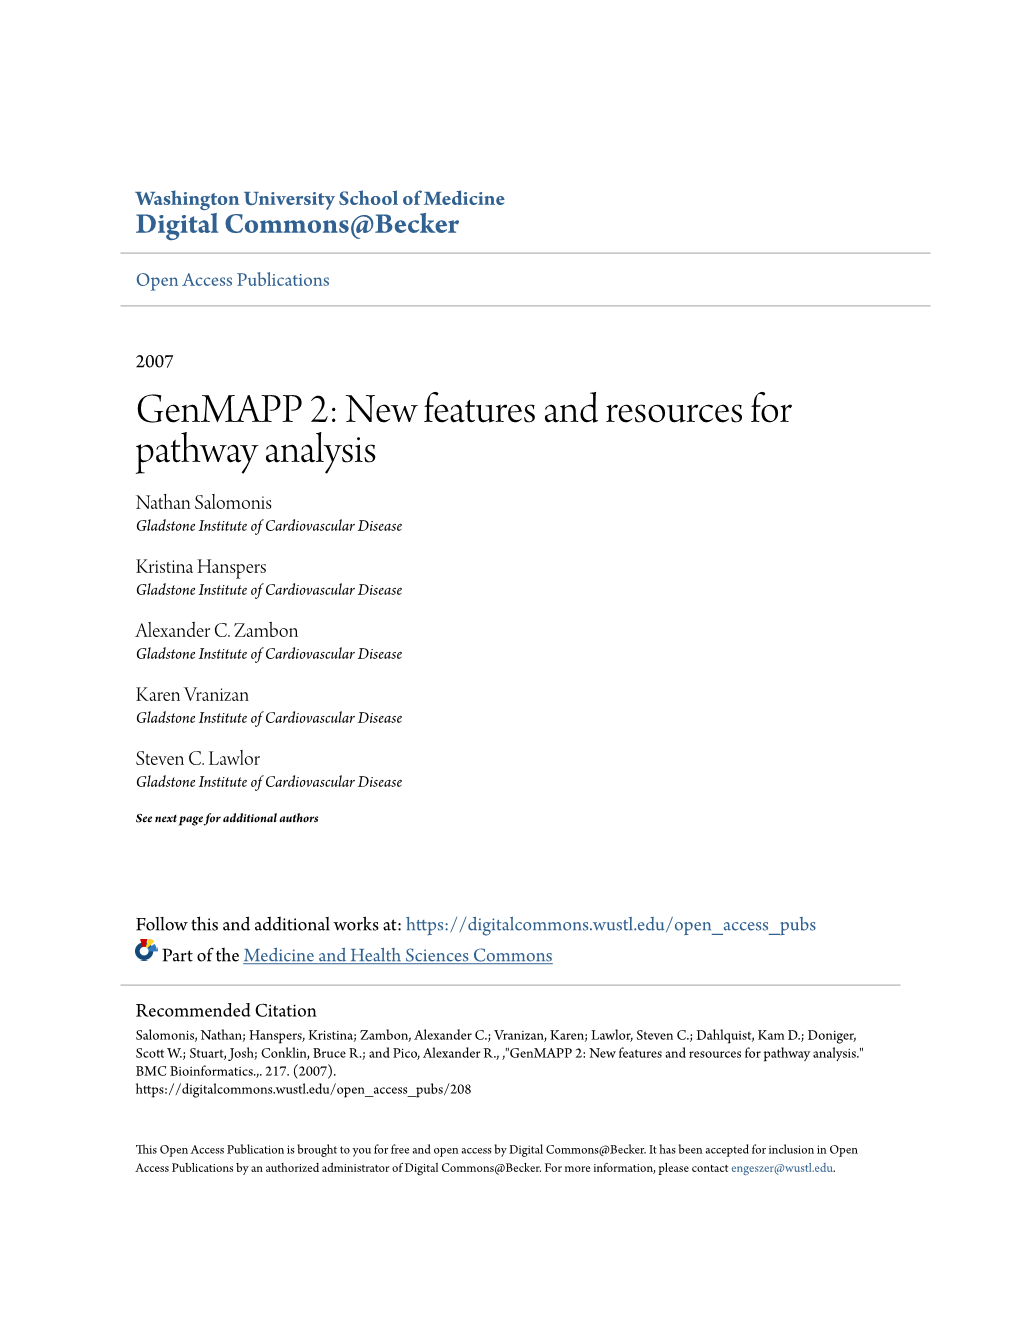 Genmapp 2: New Features and Resources for Pathway Analysis Nathan Salomonis Gladstone Institute of Cardiovascular Disease